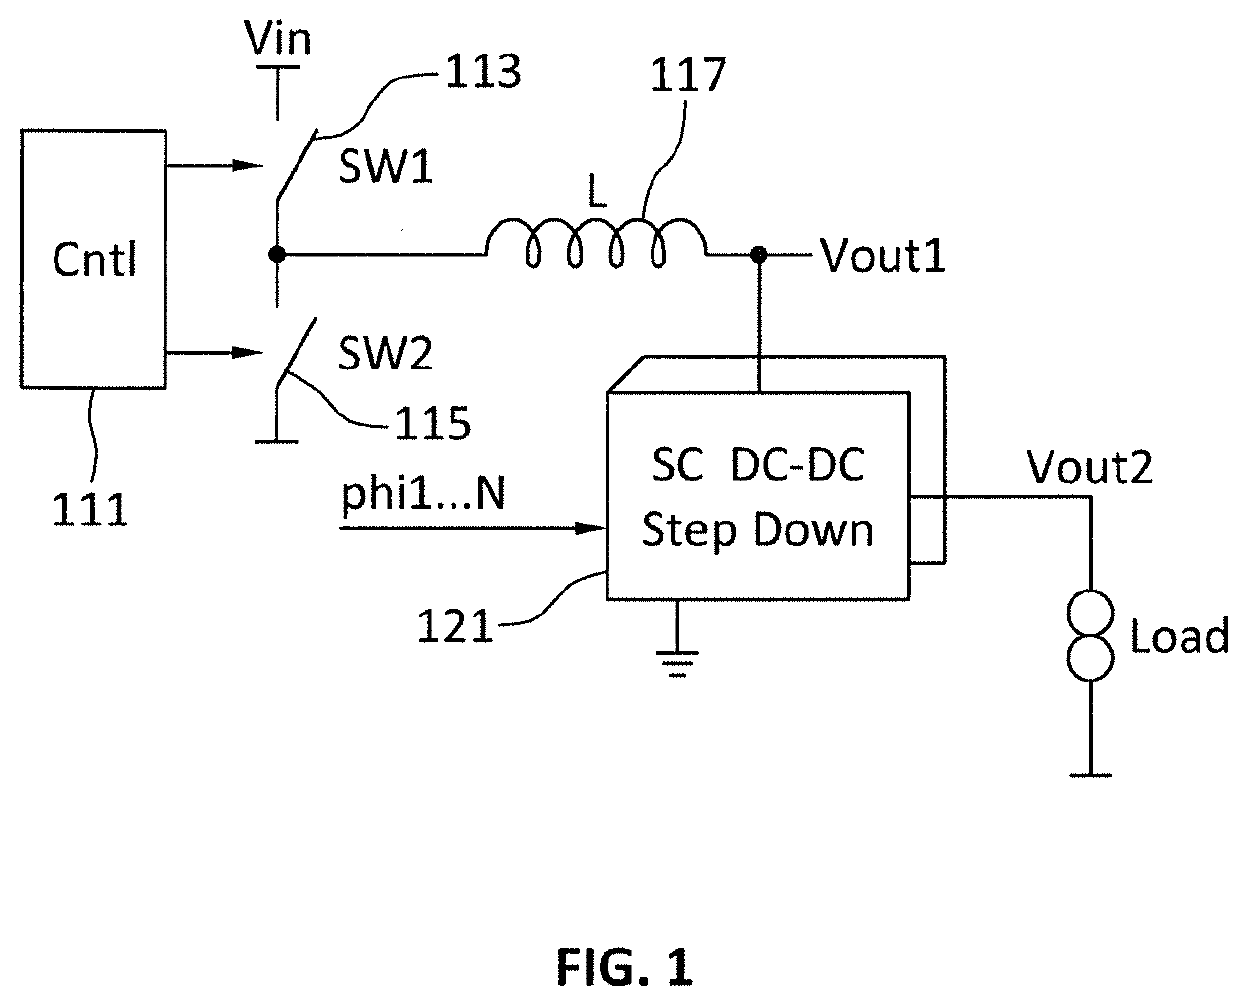 Combined inductive and switched capacitive power supply conversion